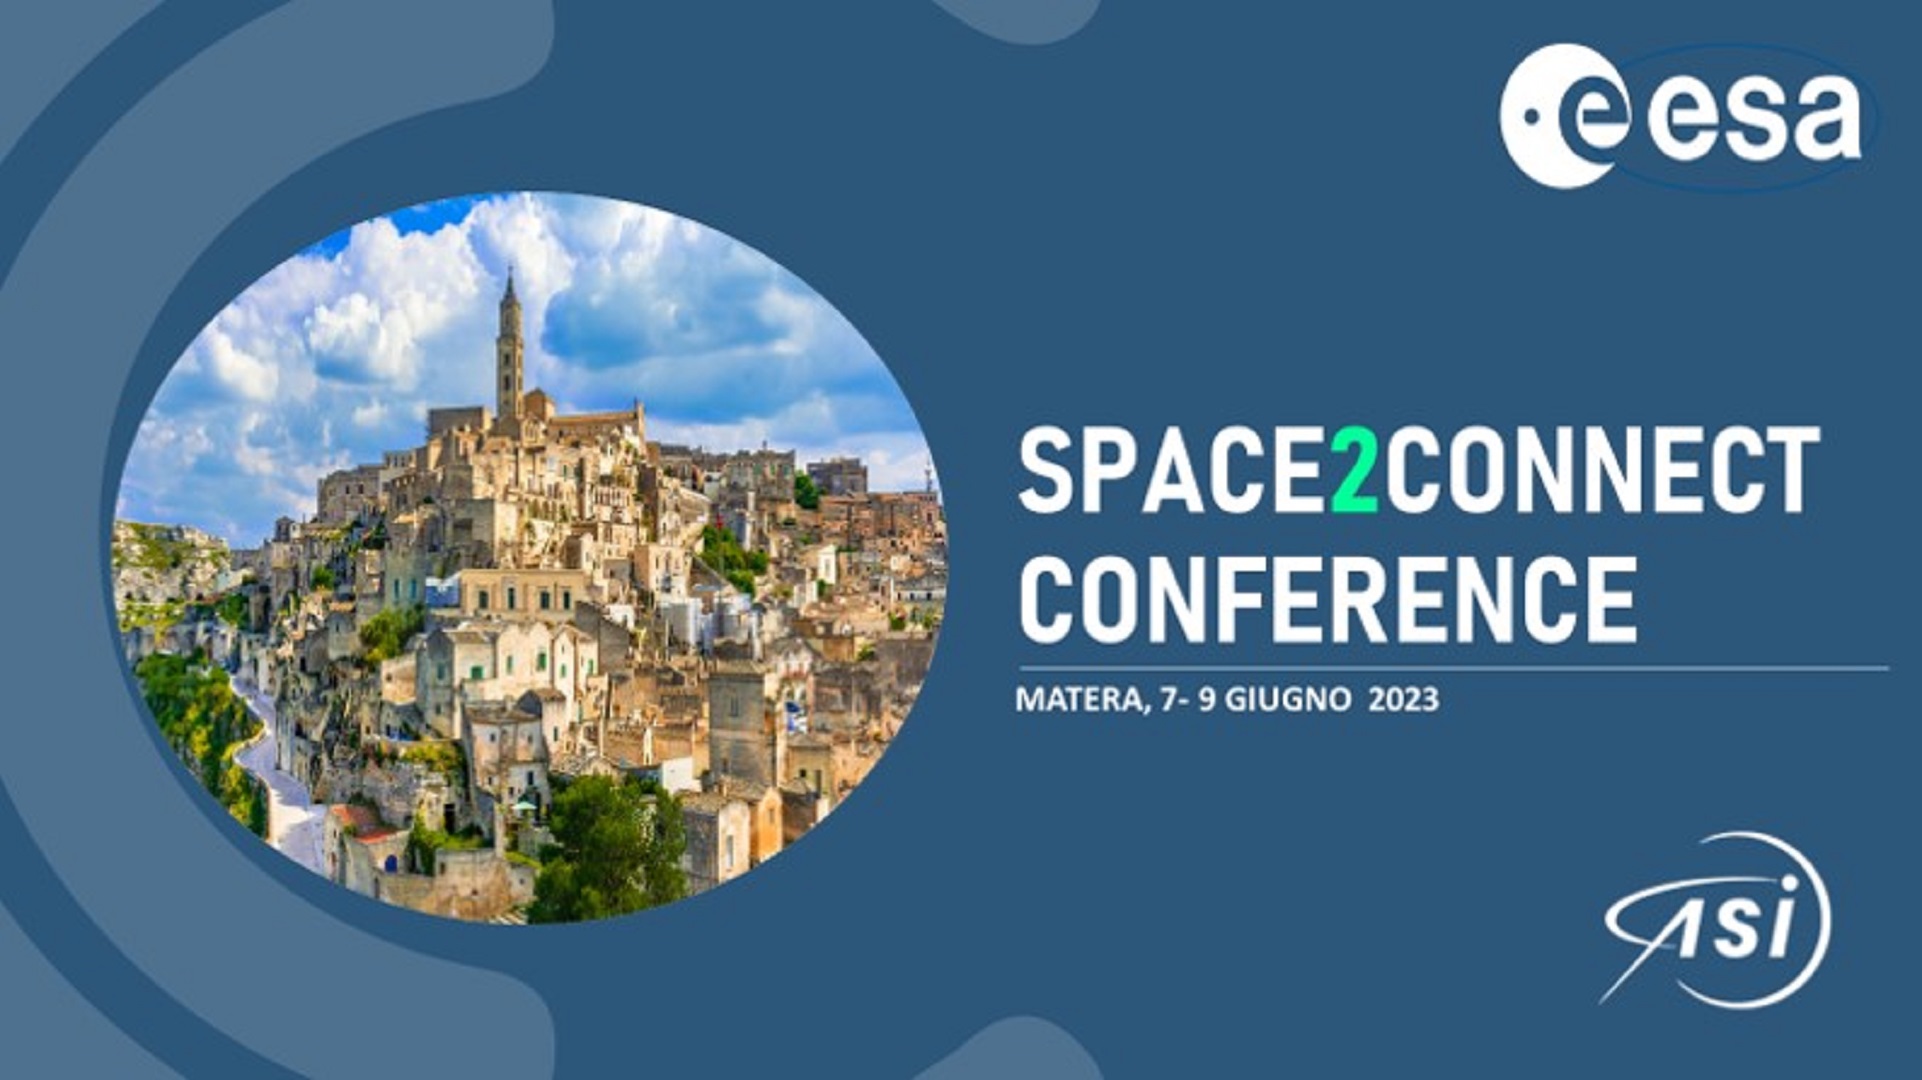 ASI - ESA Space2Connect Conference 2023 – Matera